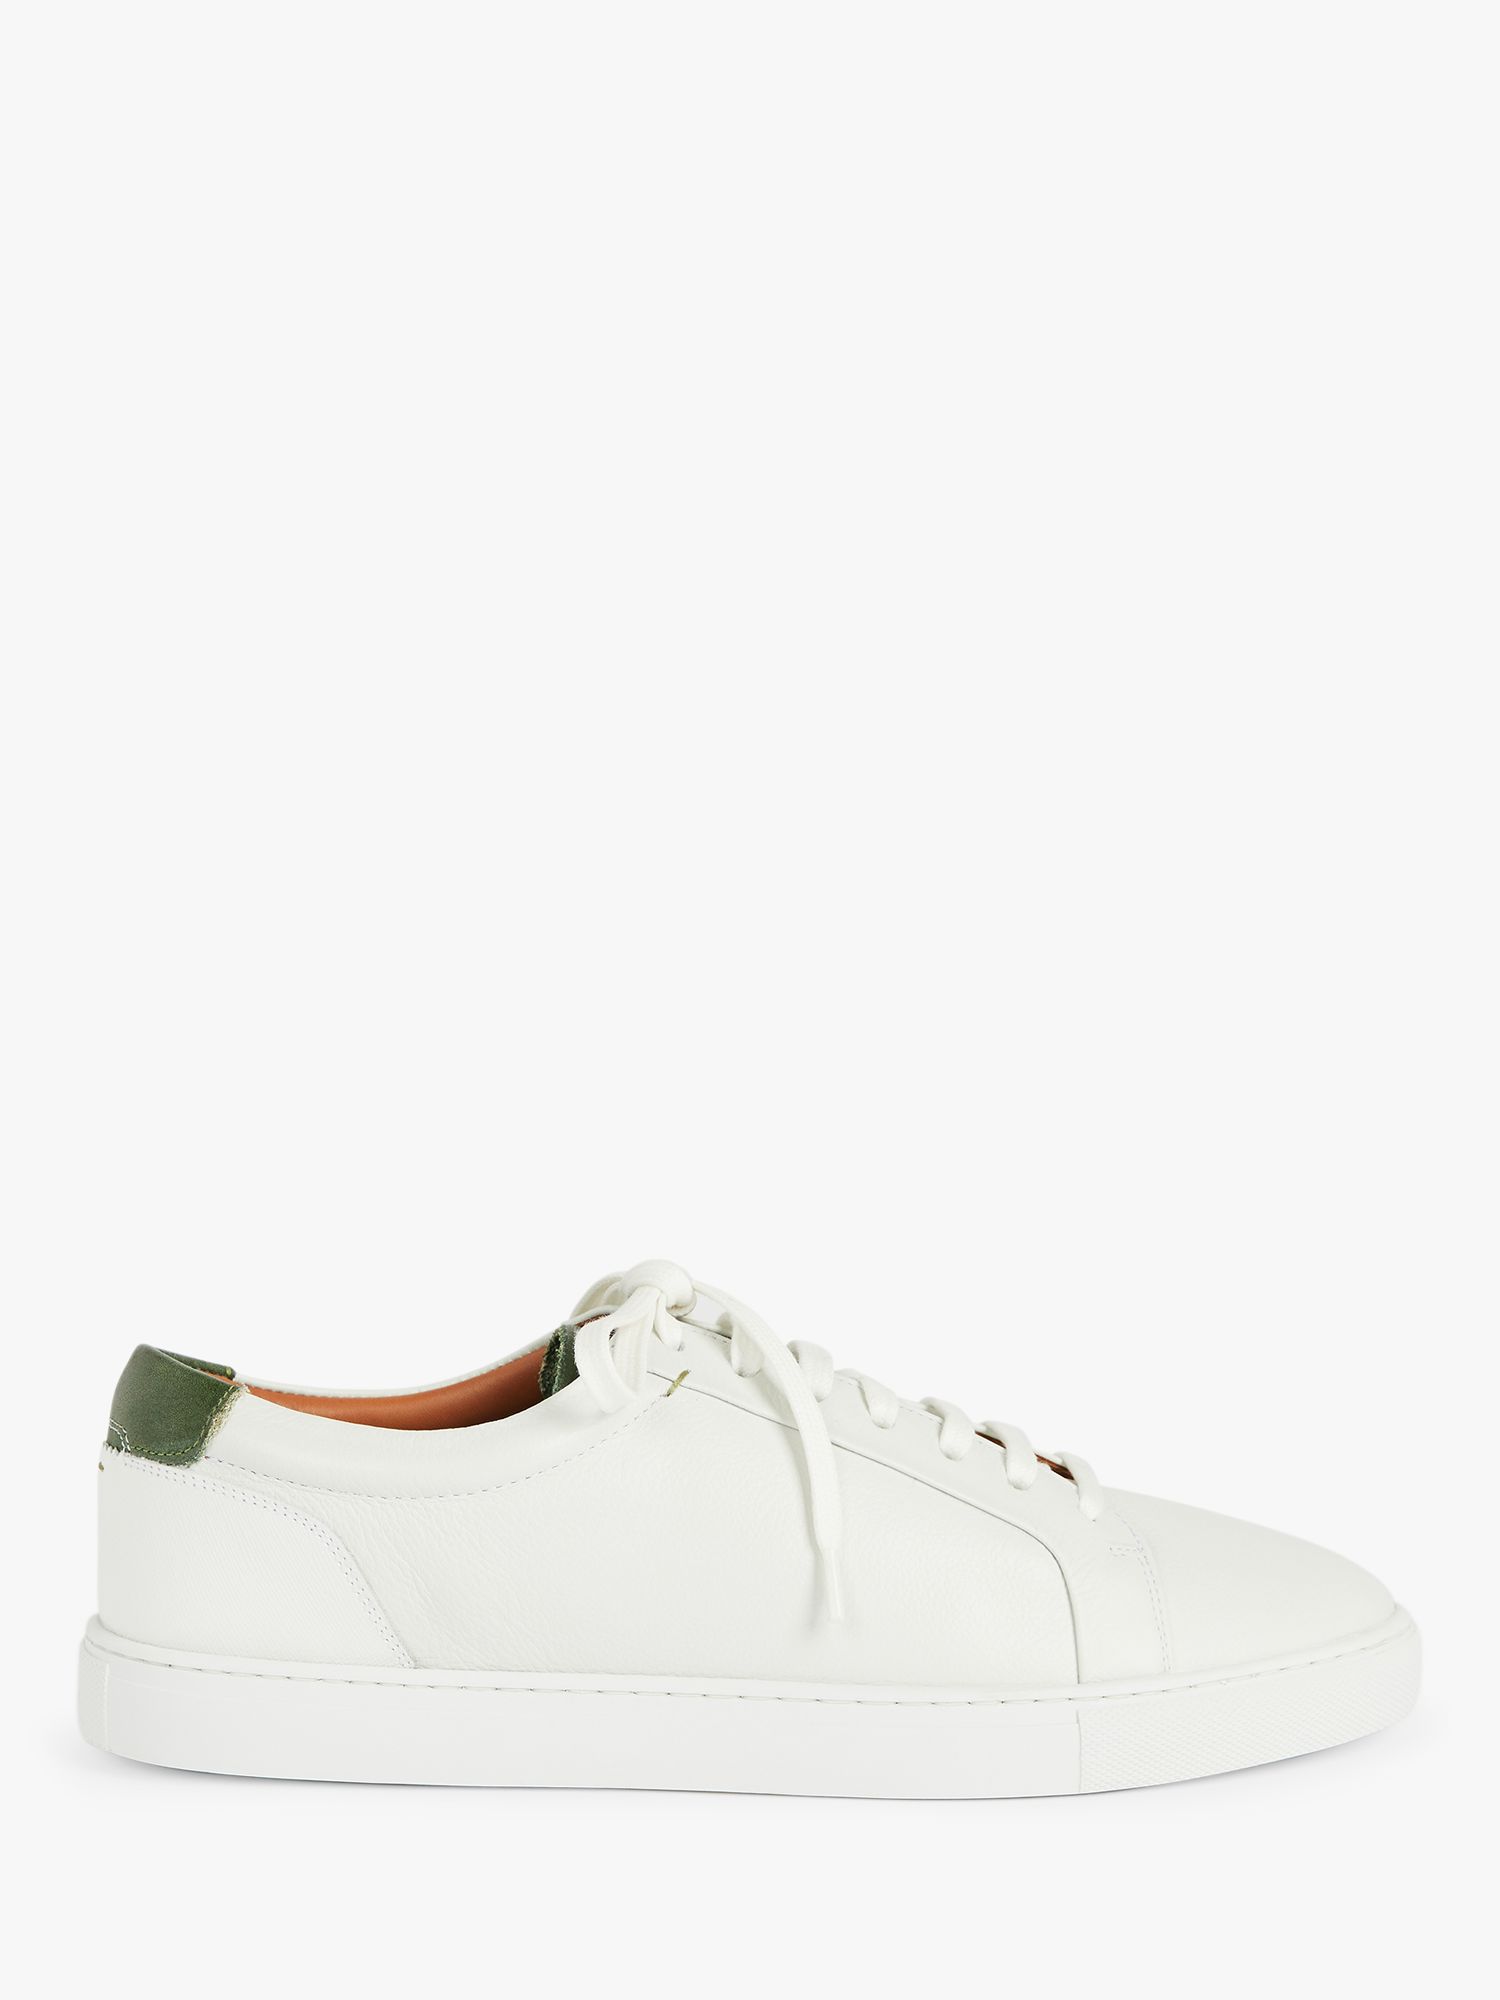 Ted Baker Udamo Leather Trainers, White at John Lewis & Partners